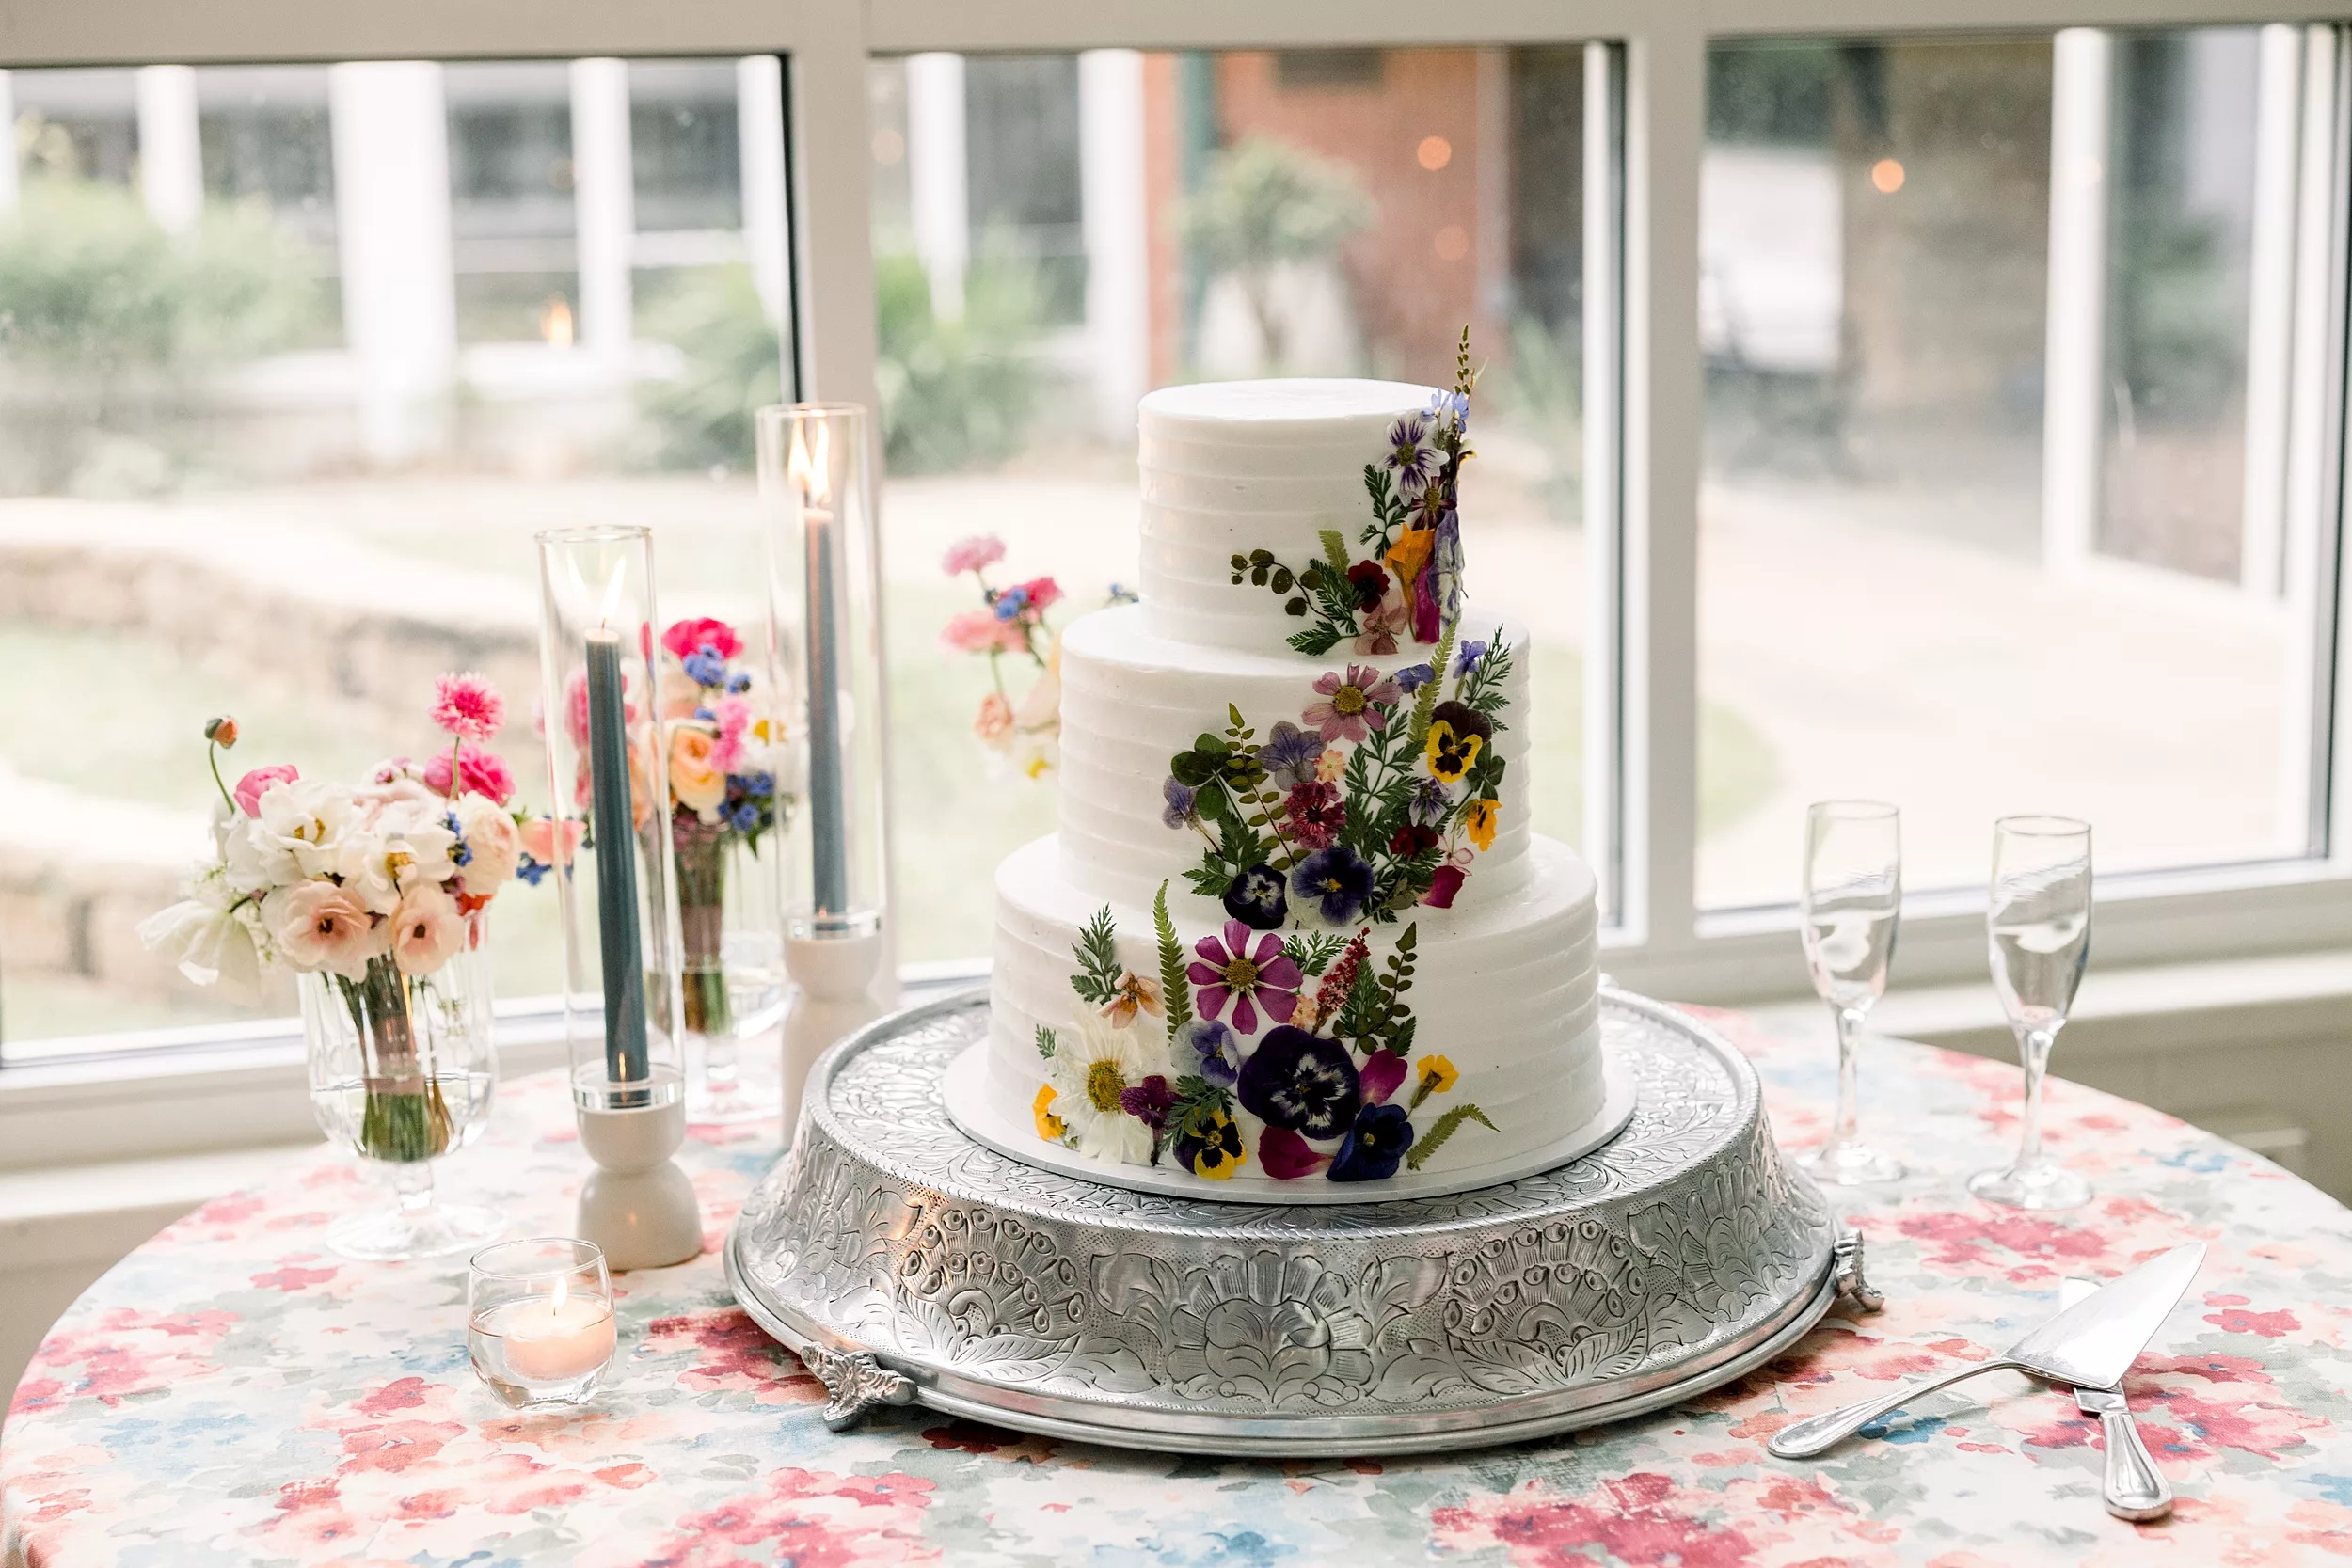 Details of a wedding cake on a silver platter with floral decorations